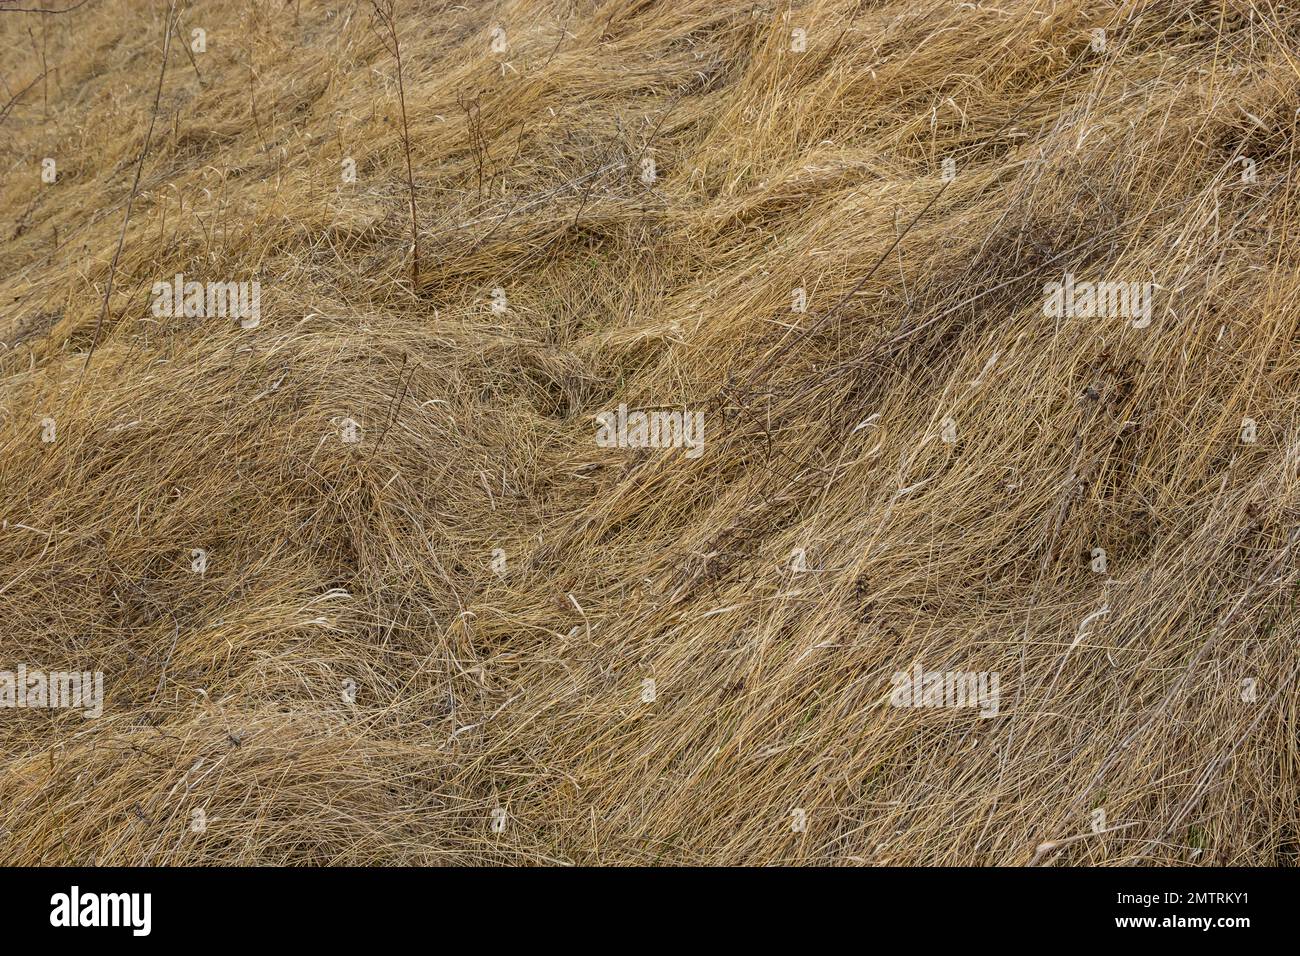 Dry grass, crushed by wind and rain, lies in a field. Yellow dead grass, natural background. Stock Photo